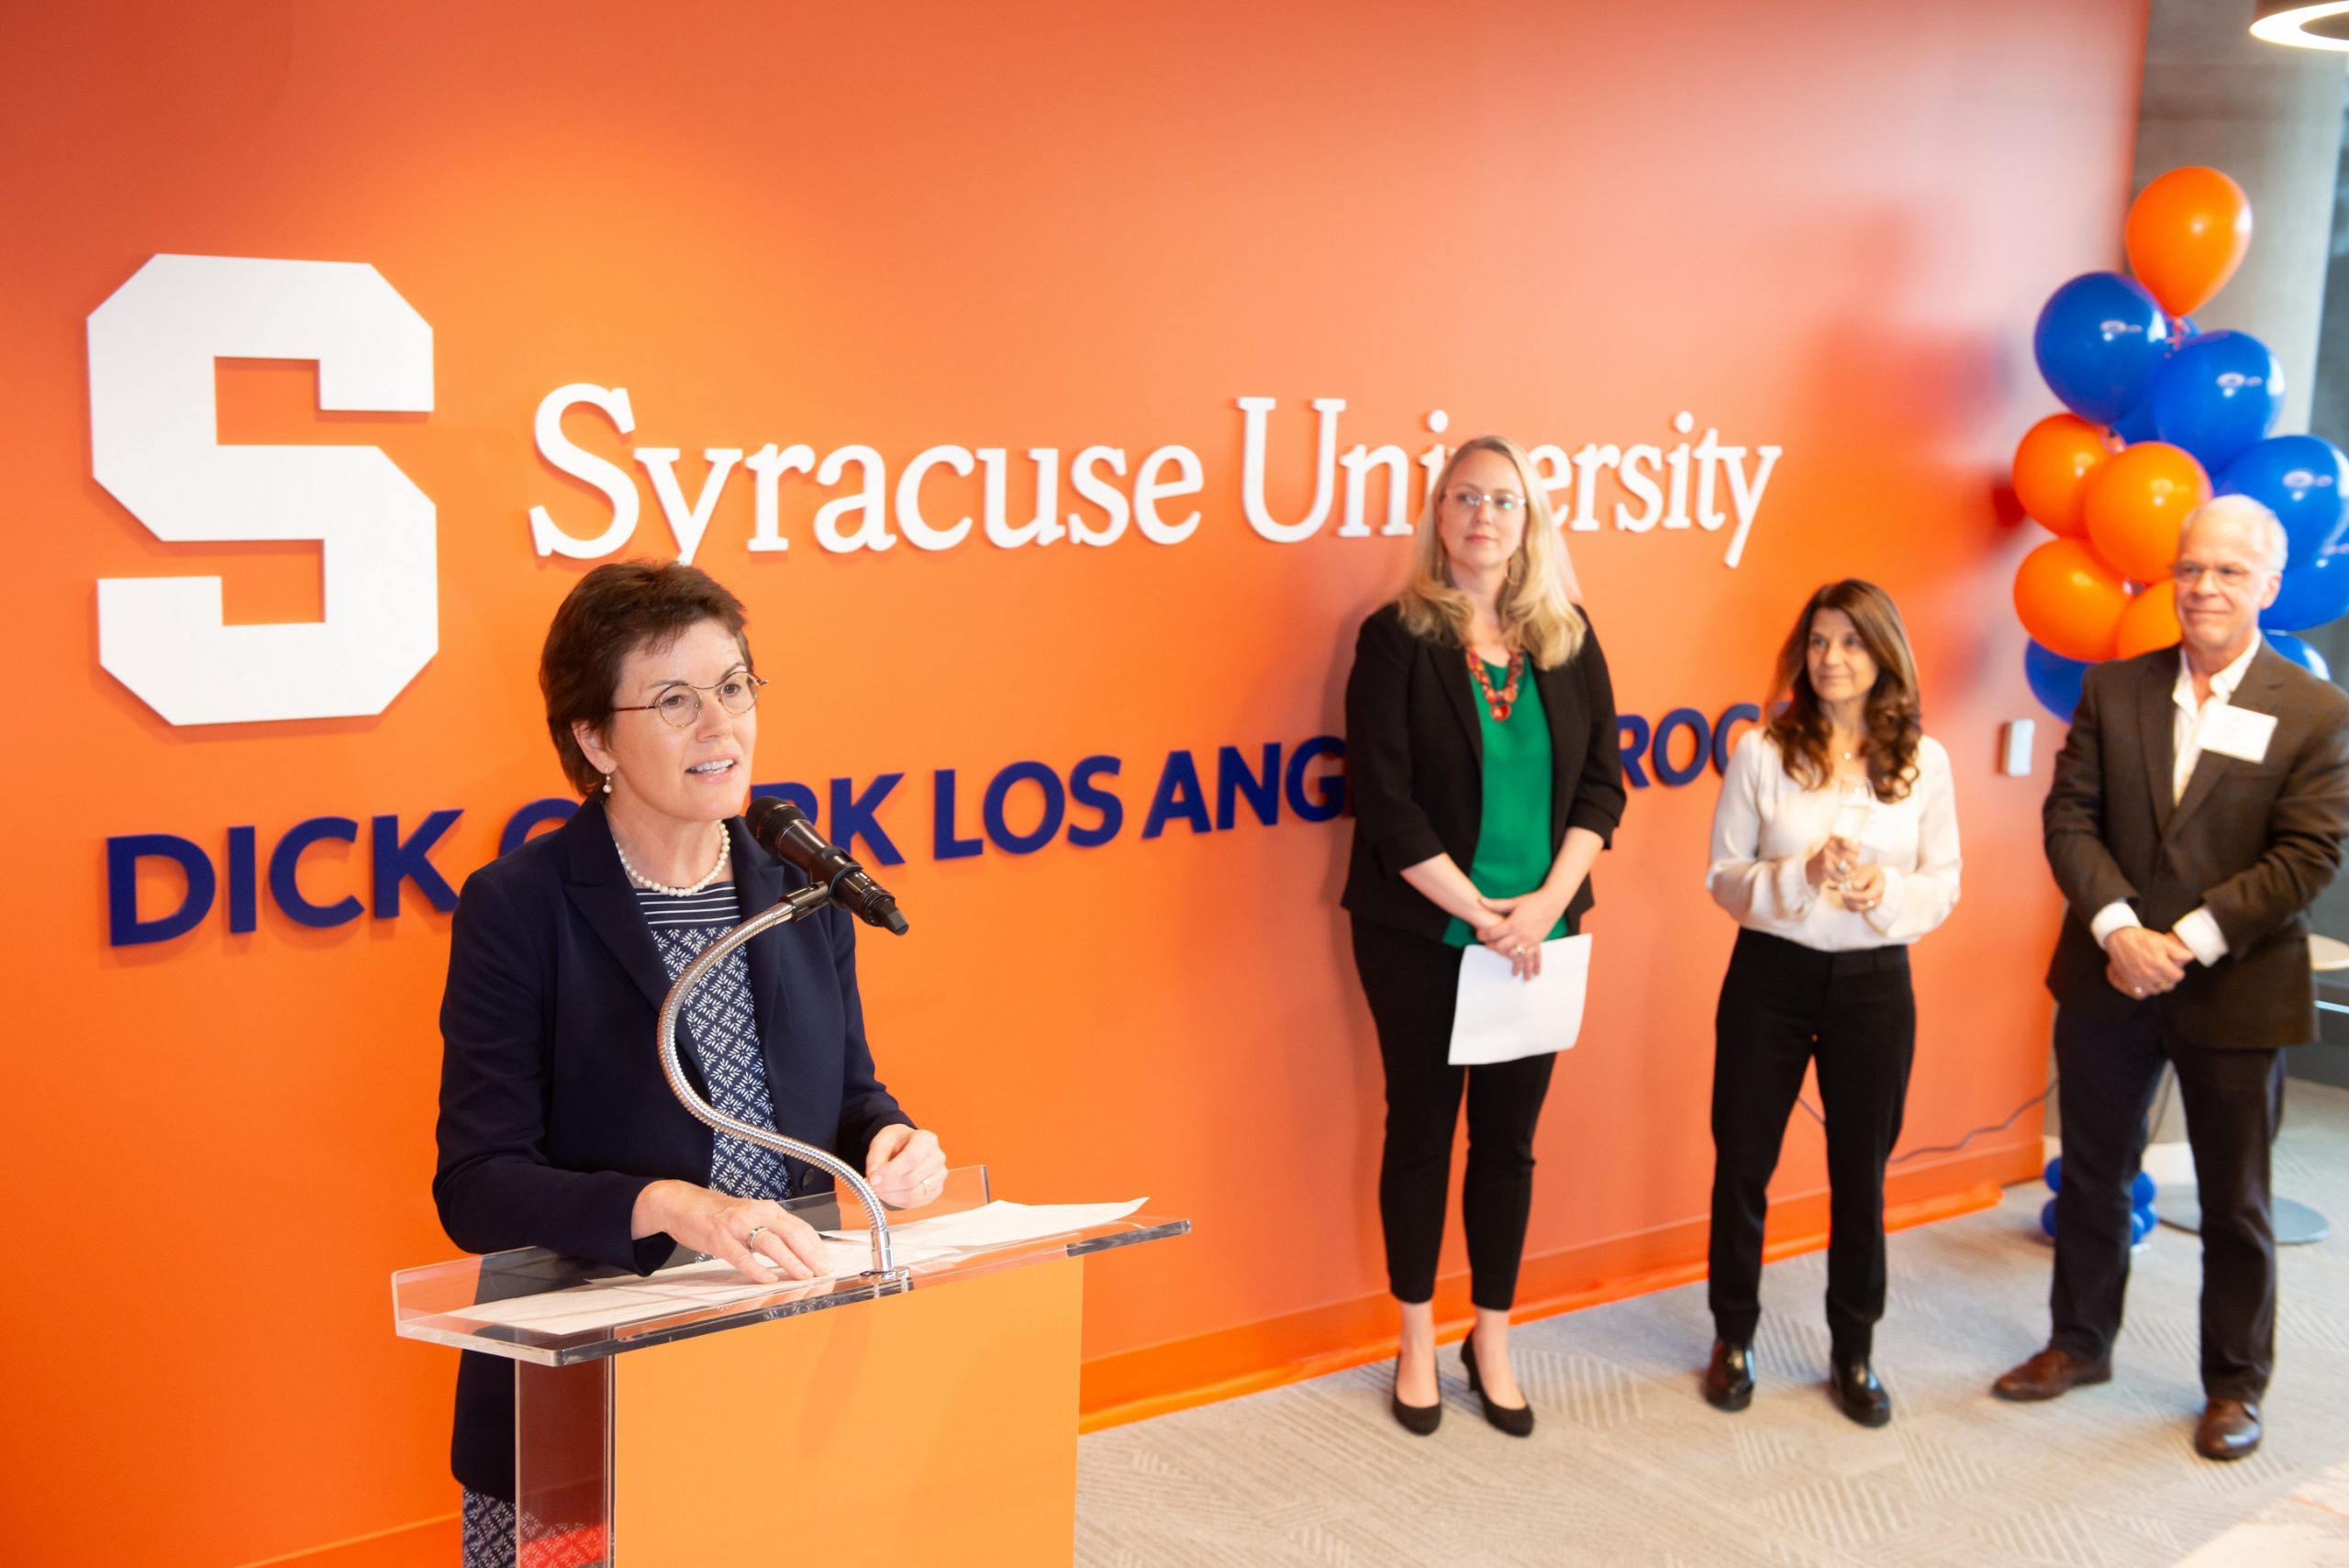 person speaking at podium with three people standing behind